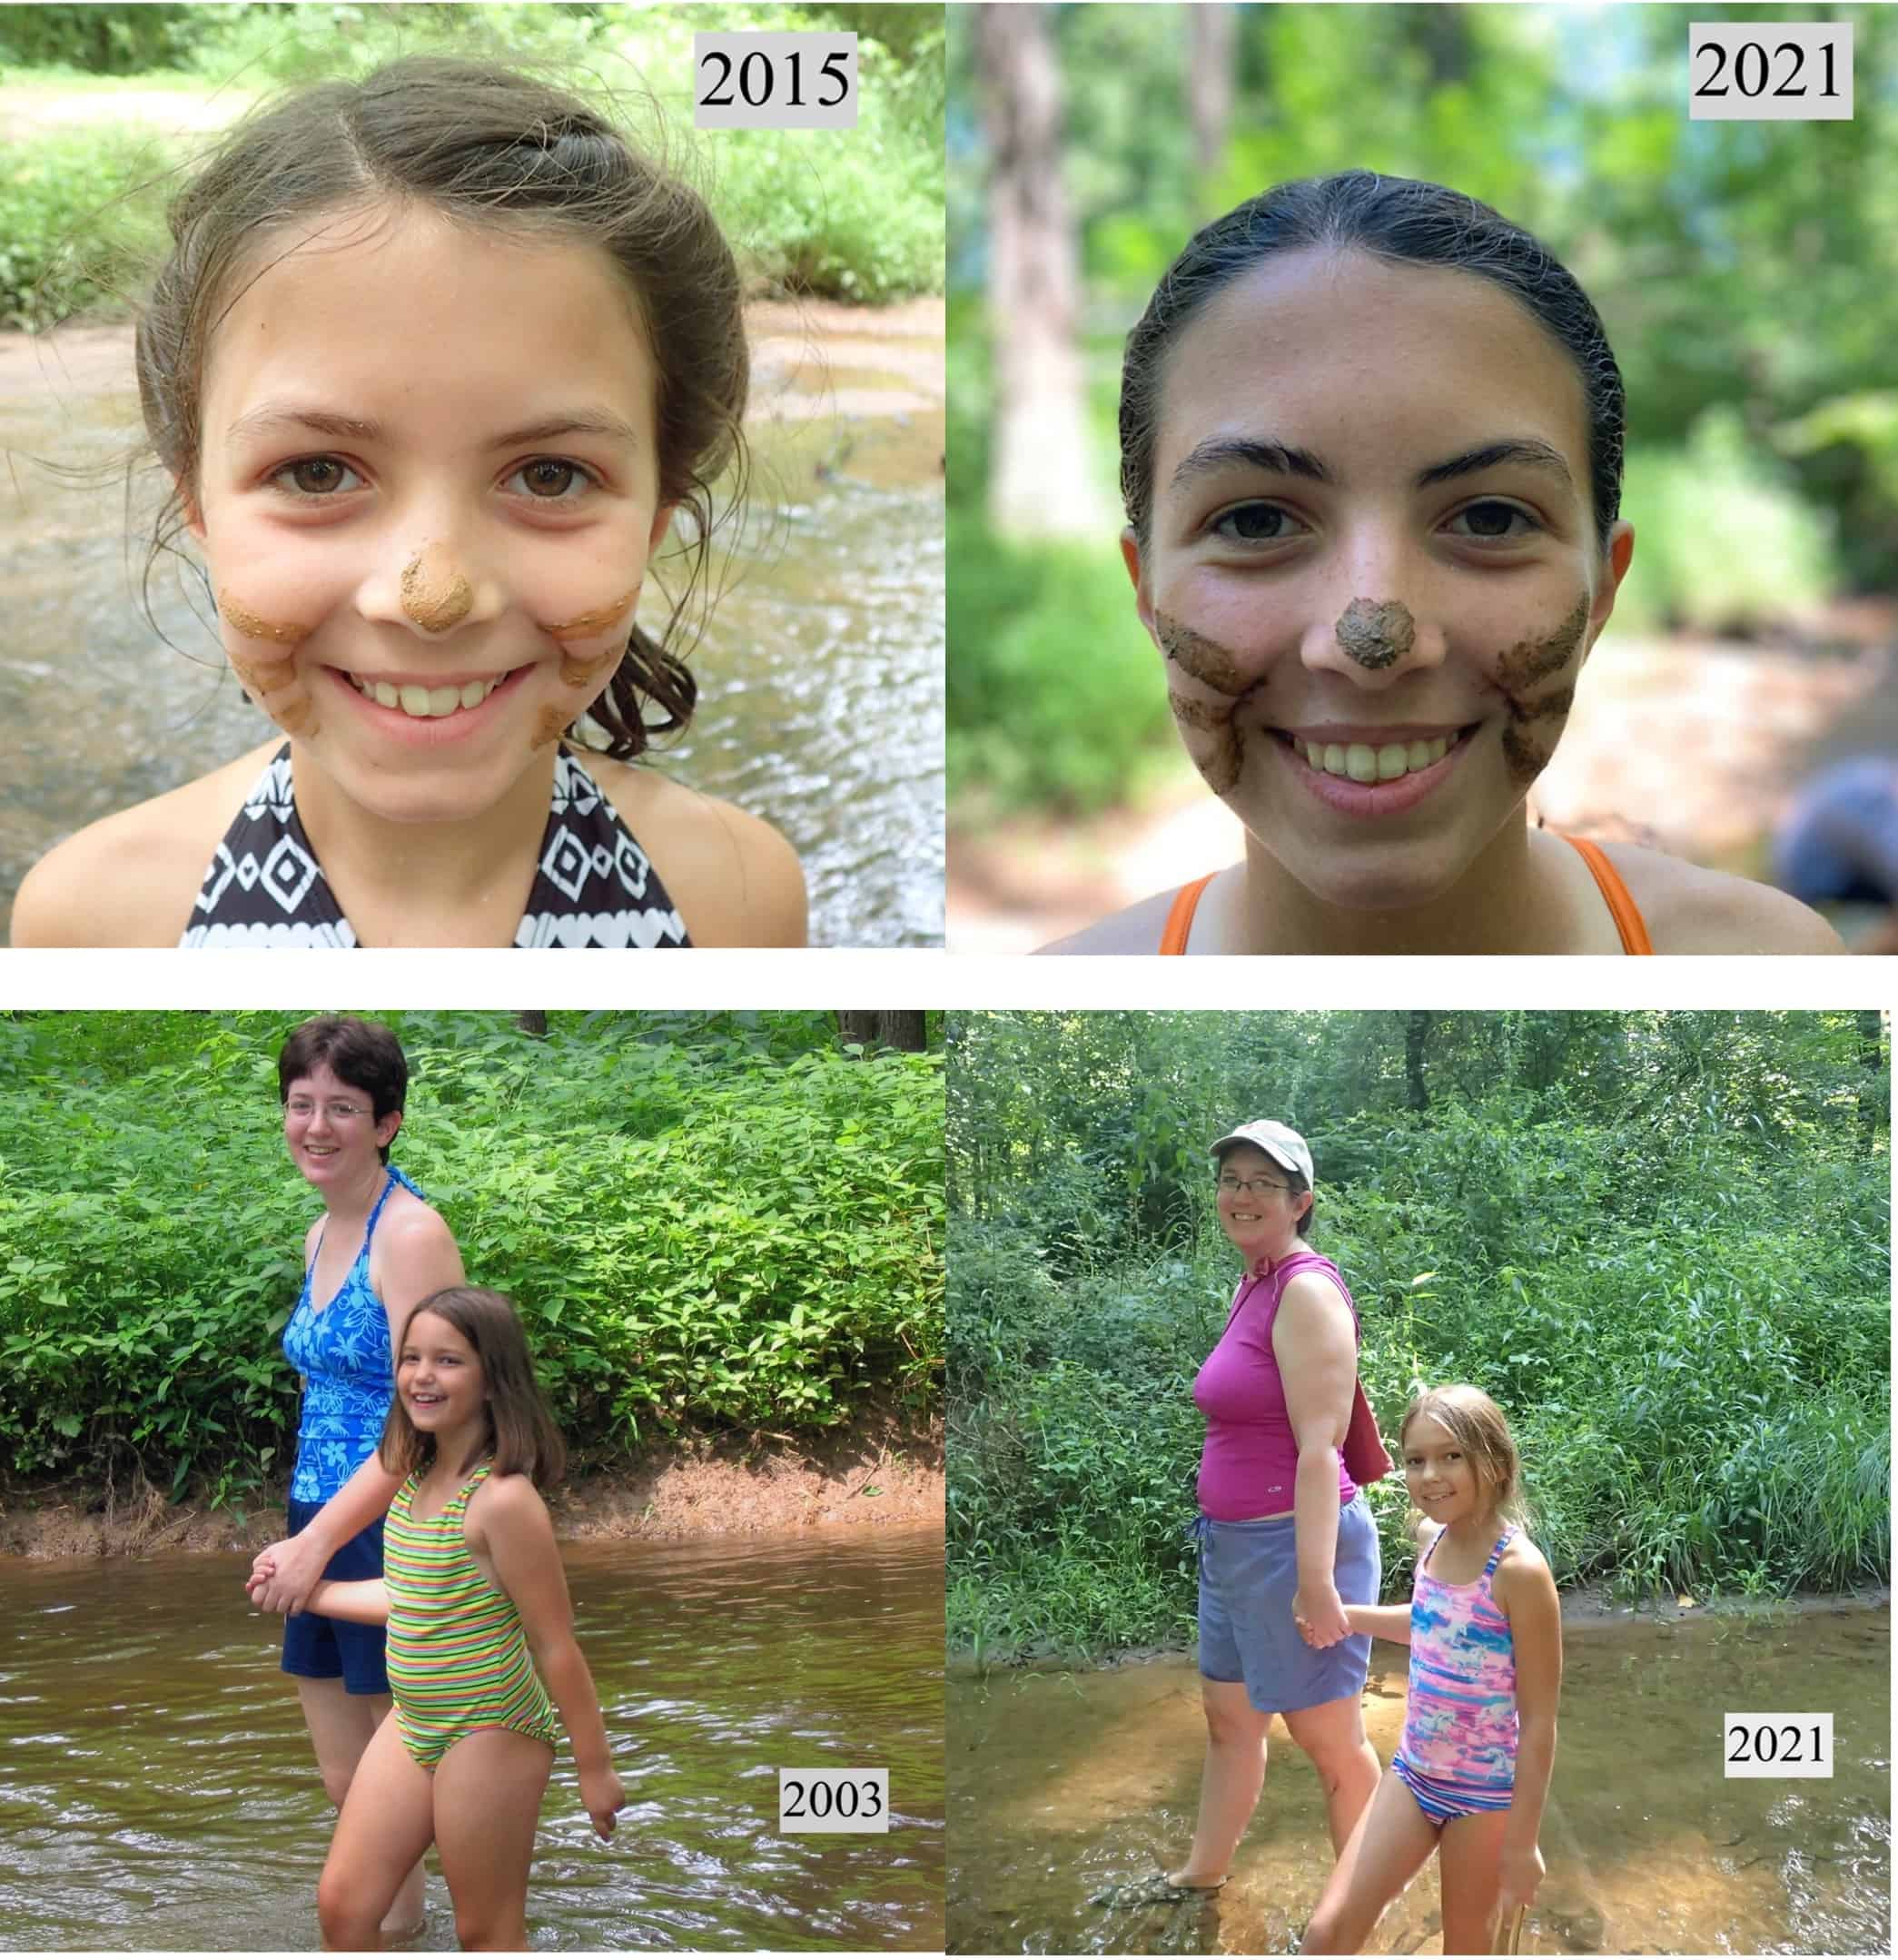 Then and now pictures of camp kids and counselors